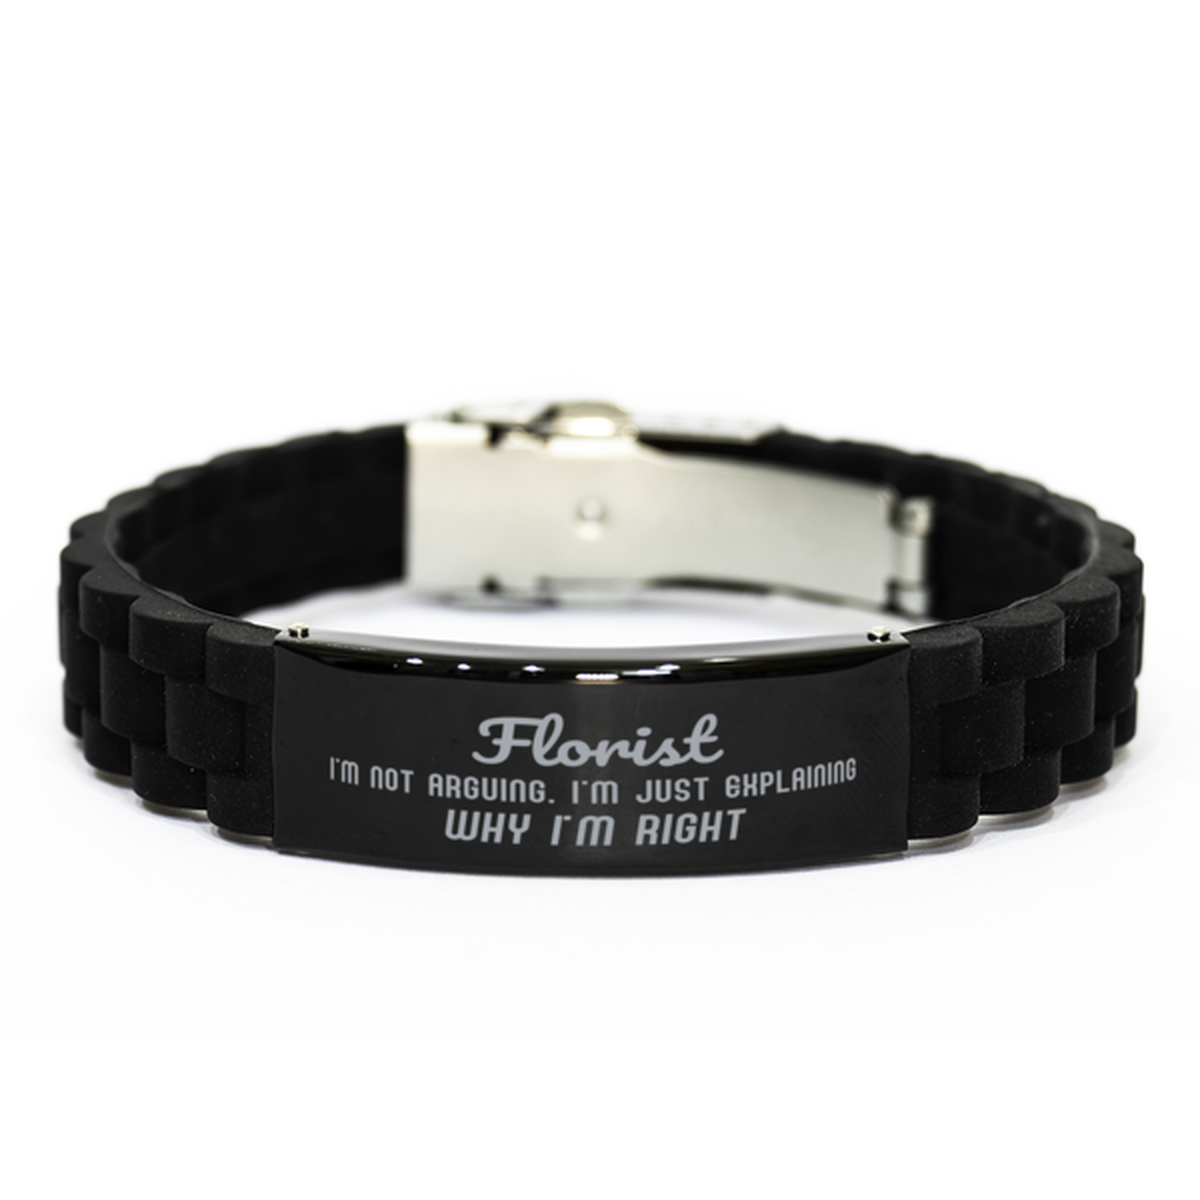 Florist I'm not Arguing. I'm Just Explaining Why I'm RIGHT Black Glidelock Clasp Bracelet, Funny Saying Quote Florist Gifts For Florist Graduation Birthday Christmas Gifts for Men Women Coworker